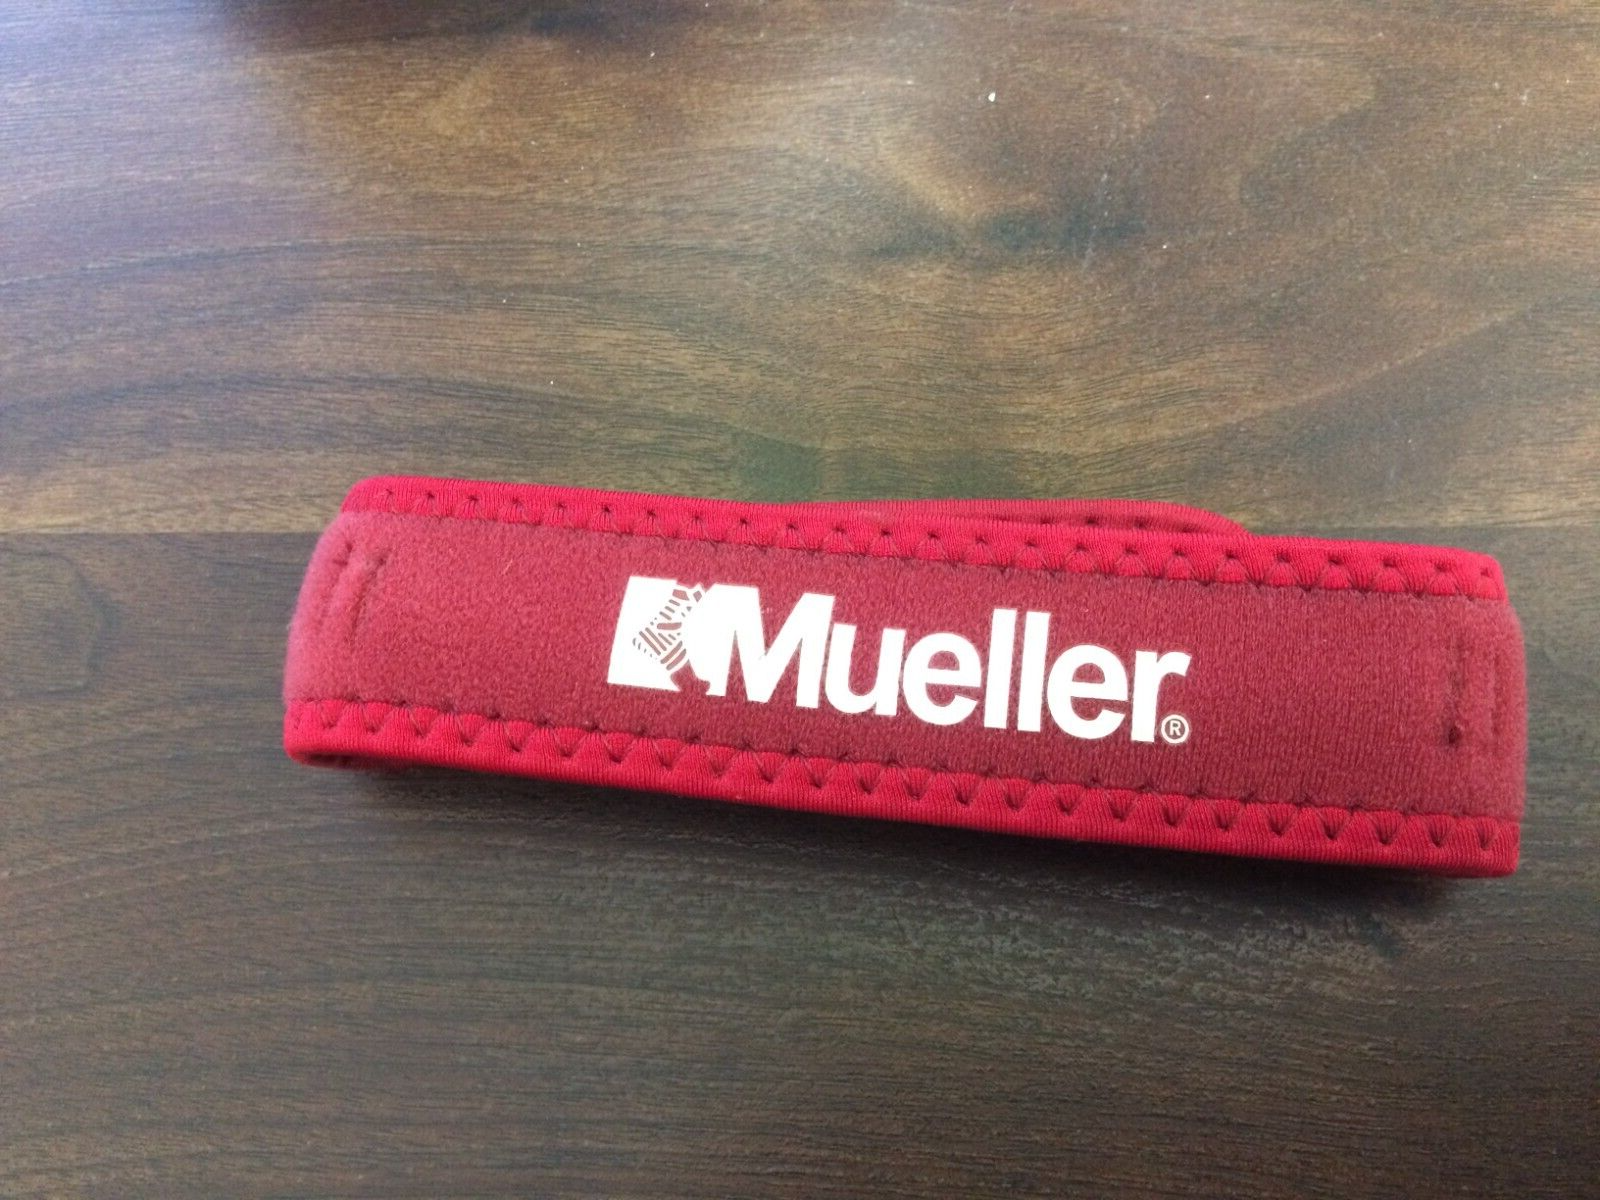 Mueller Knee Strap Jumpers Moderate Support Antimicrobial Adjustable One Size - $9.89